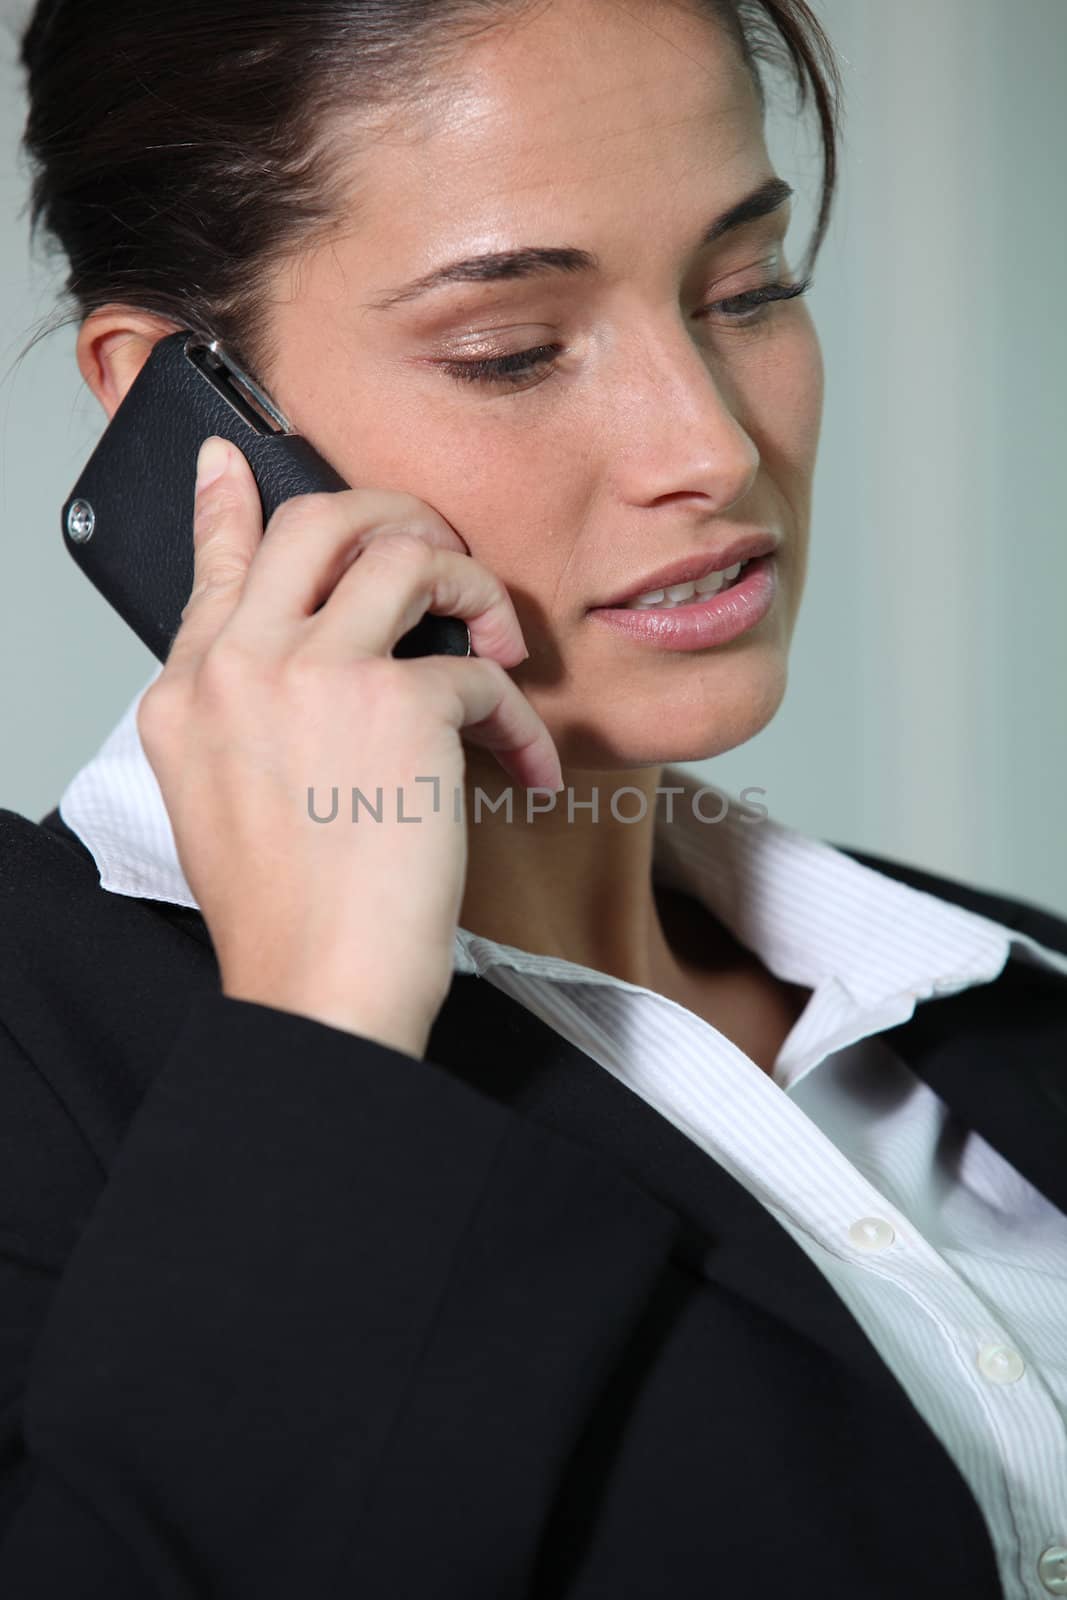 Businesswoman smiling holding mobile telephone by phovoir